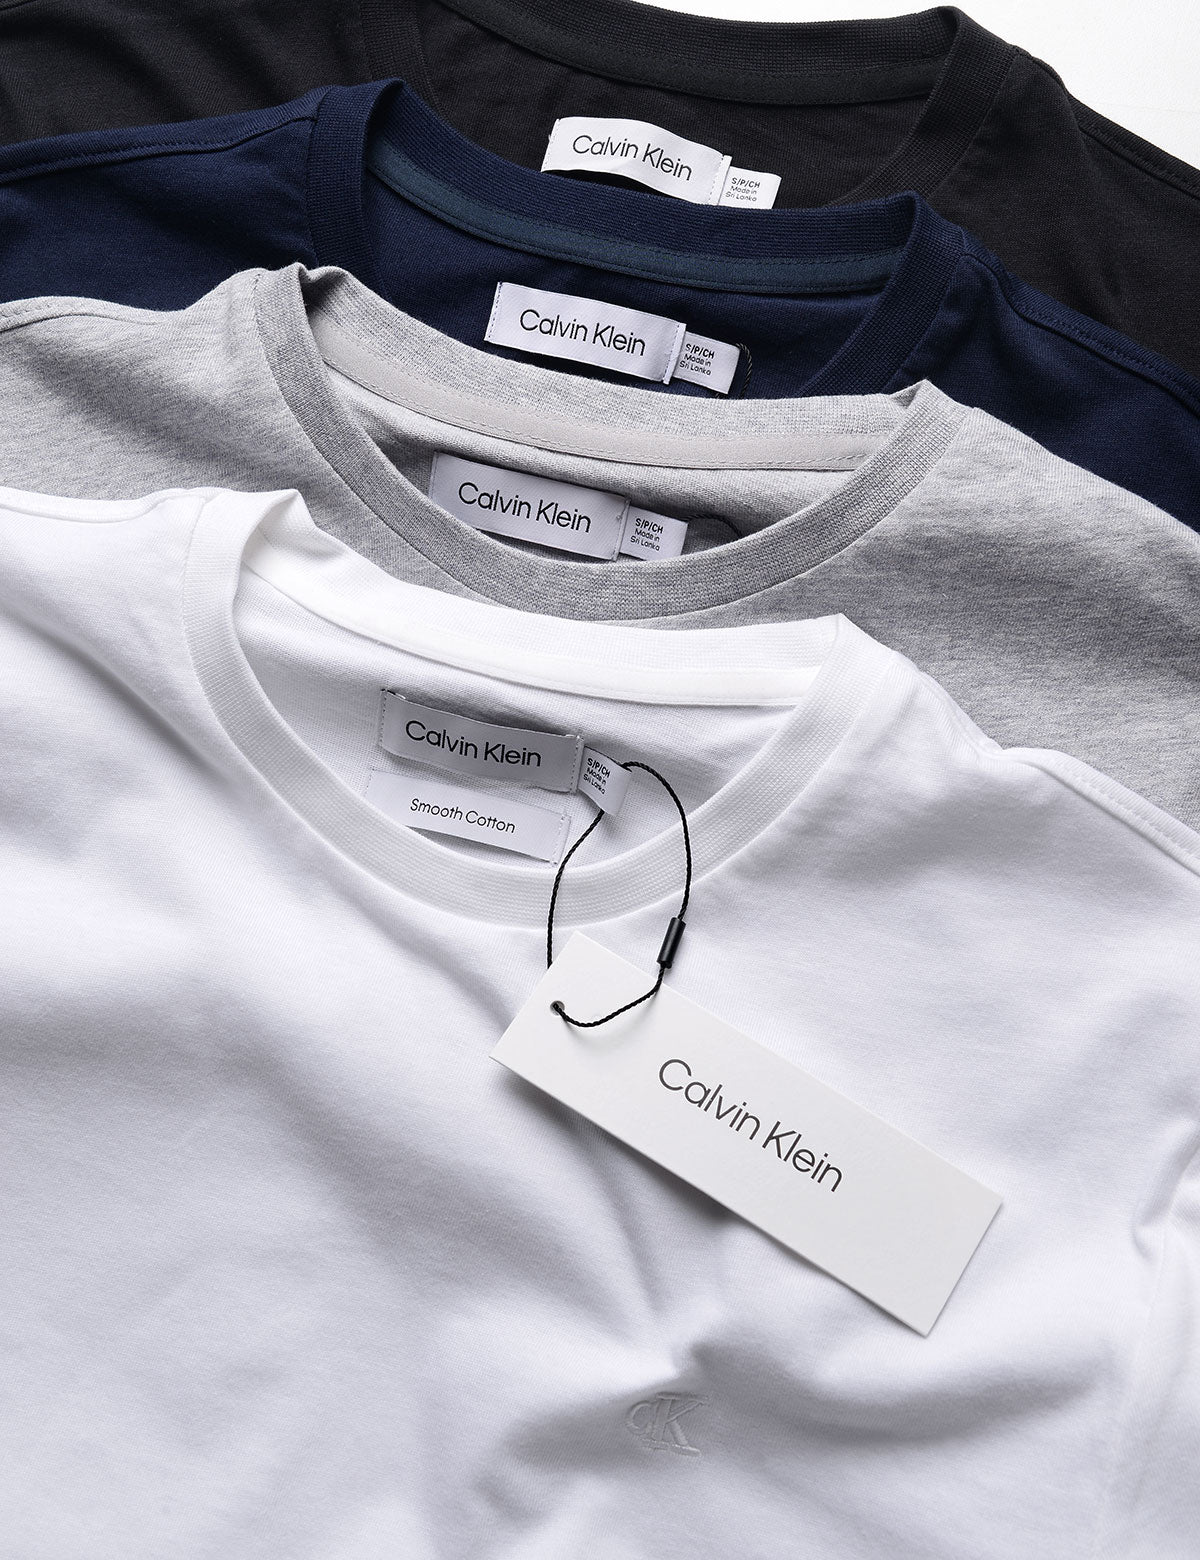 Short Sleeve Smooth Cotton Solid Crewneck Tee - Brilliant White